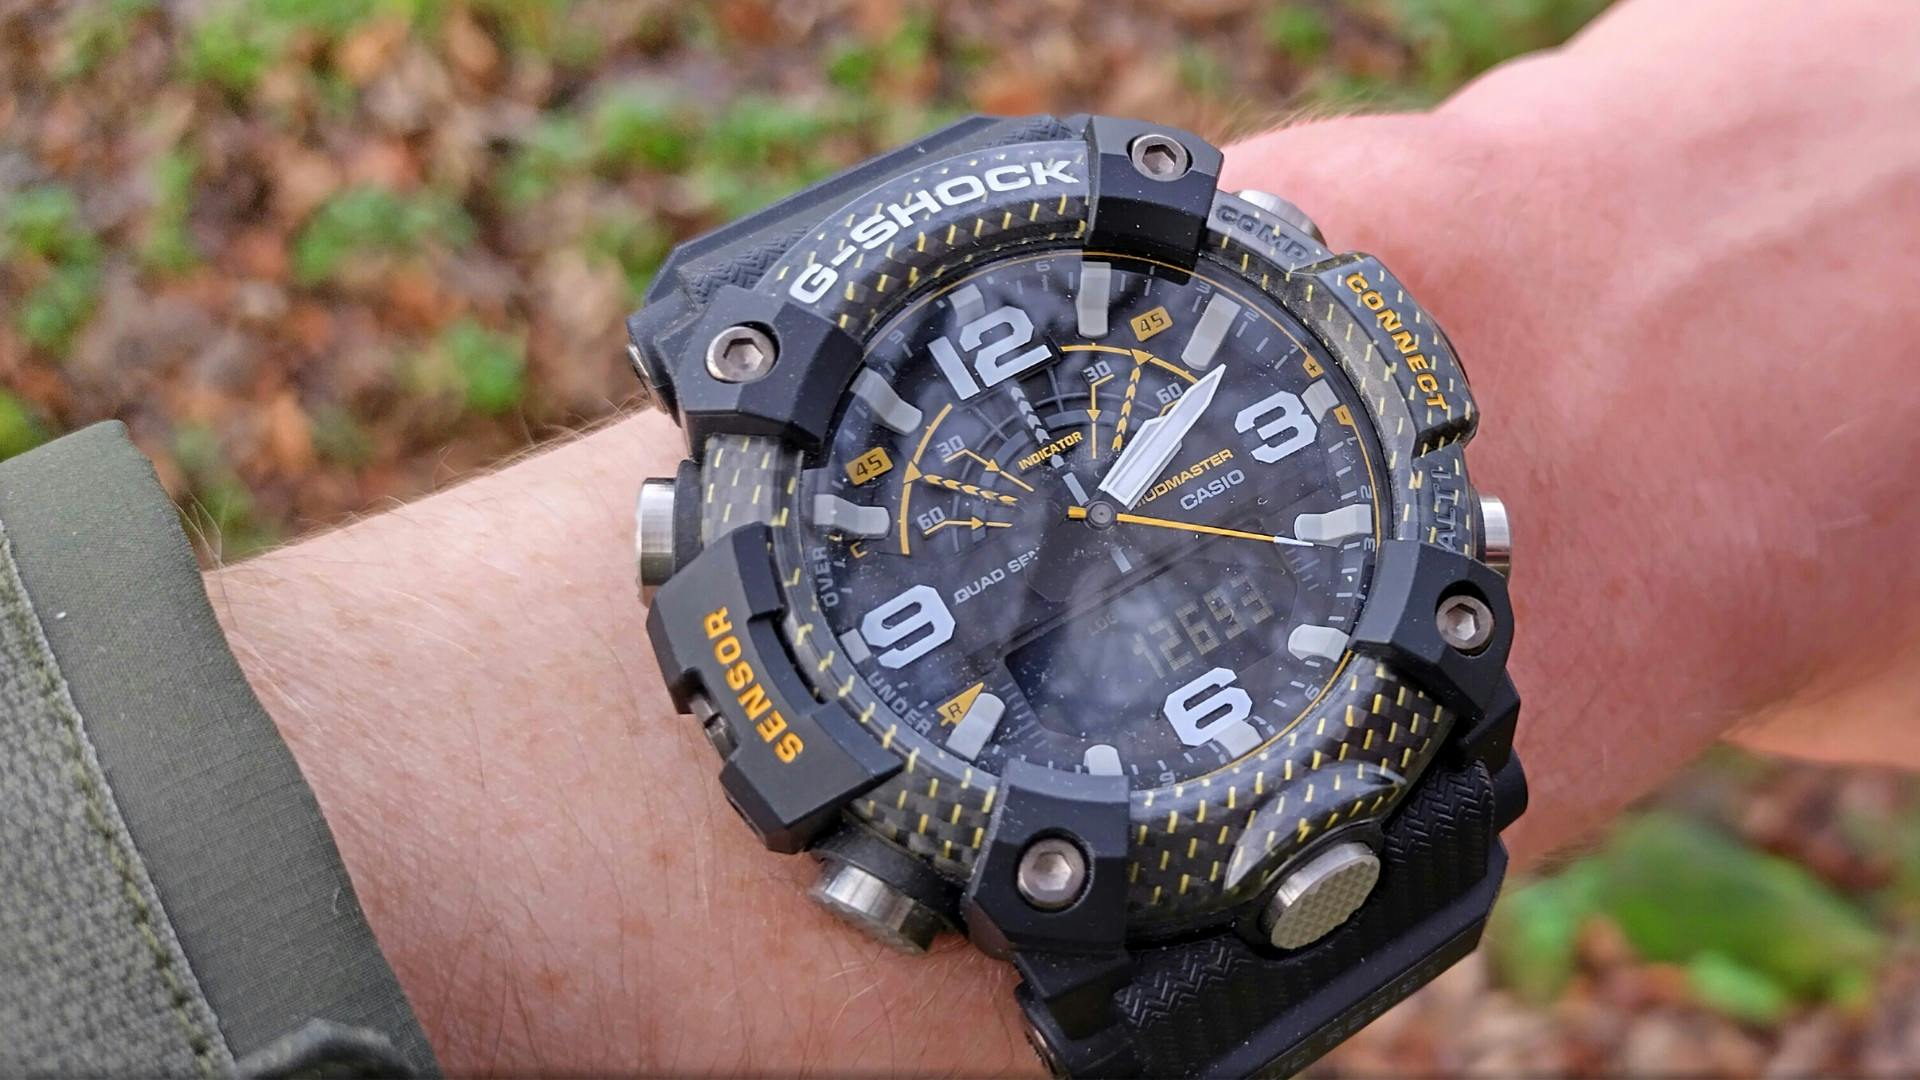 Casio G-Shock Mudmaster GG-B100 Review | Hiking | live for the